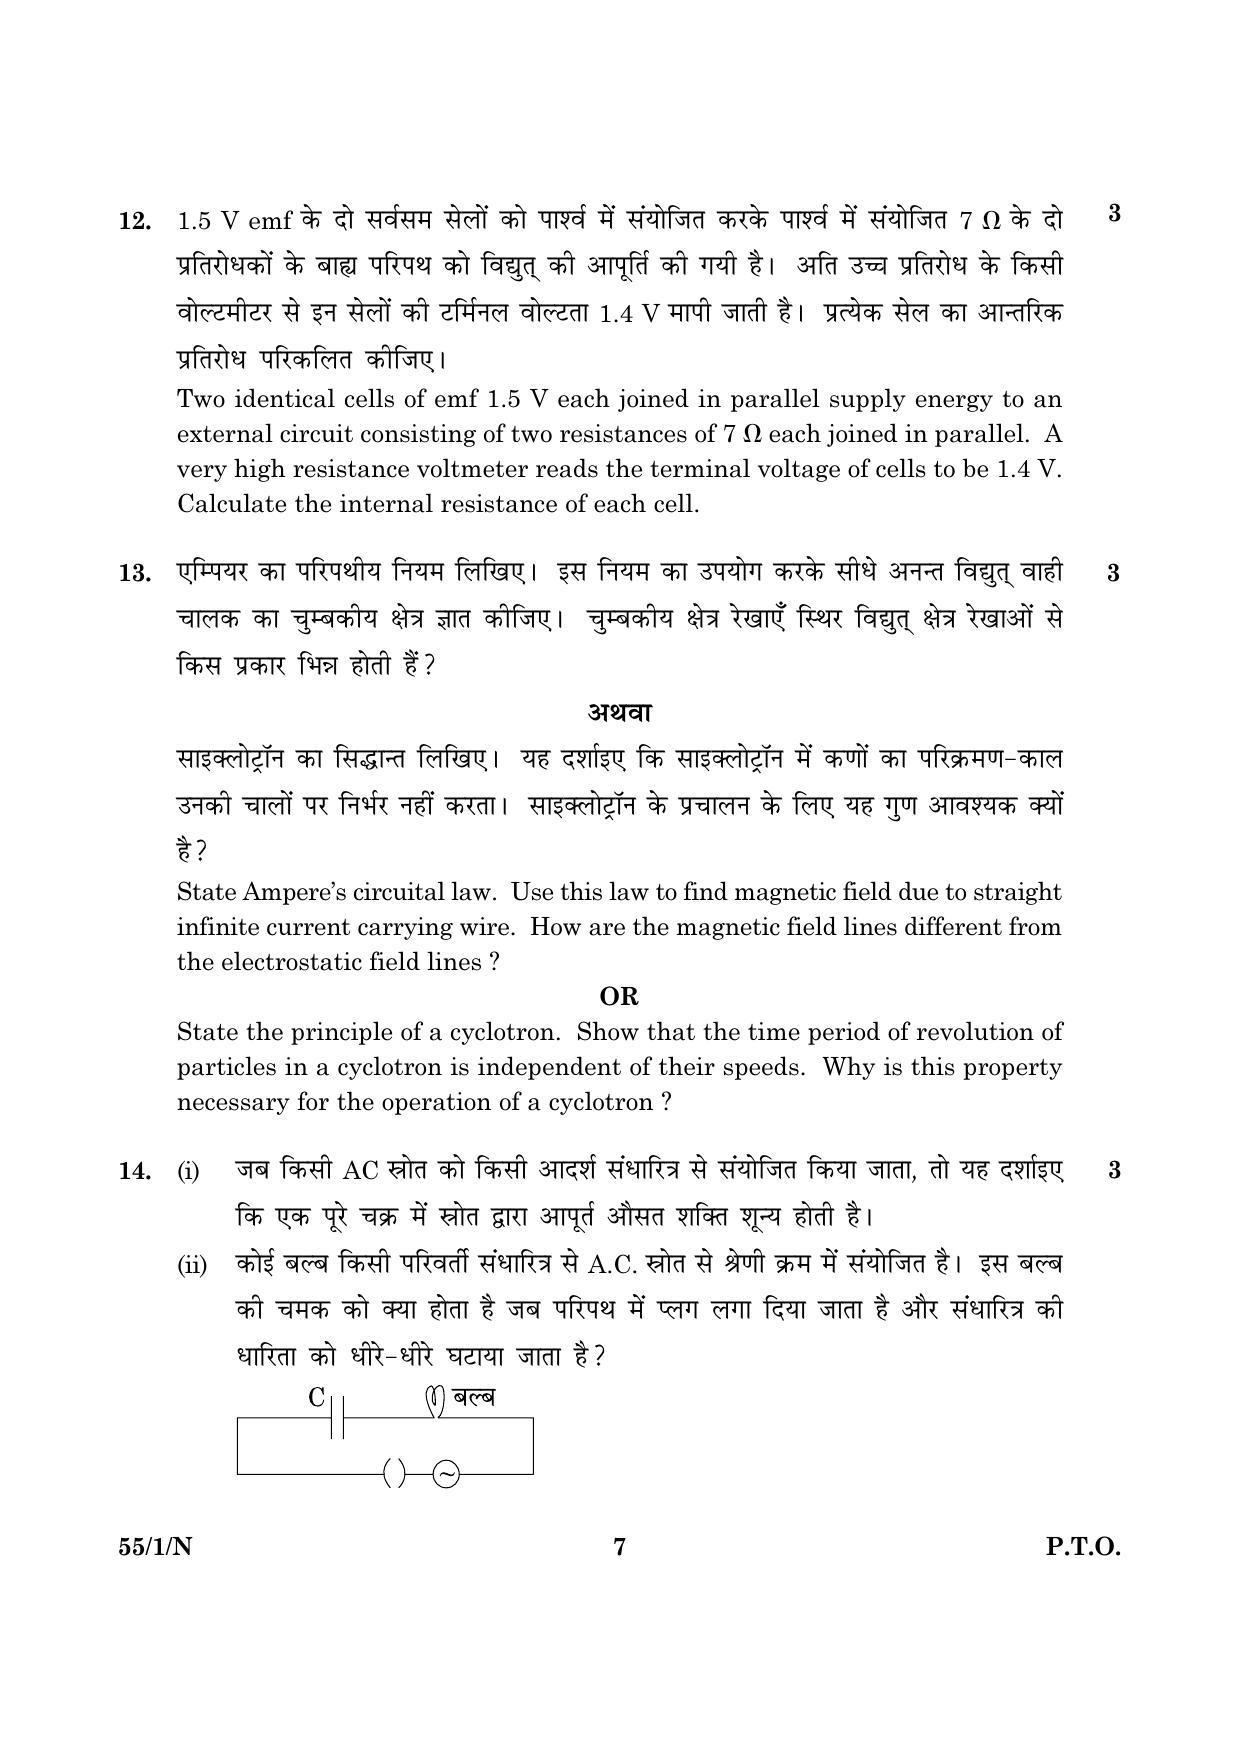 CBSE Class 12 055 Set 1 N Physics Theory 2016 Question Paper - Page 7